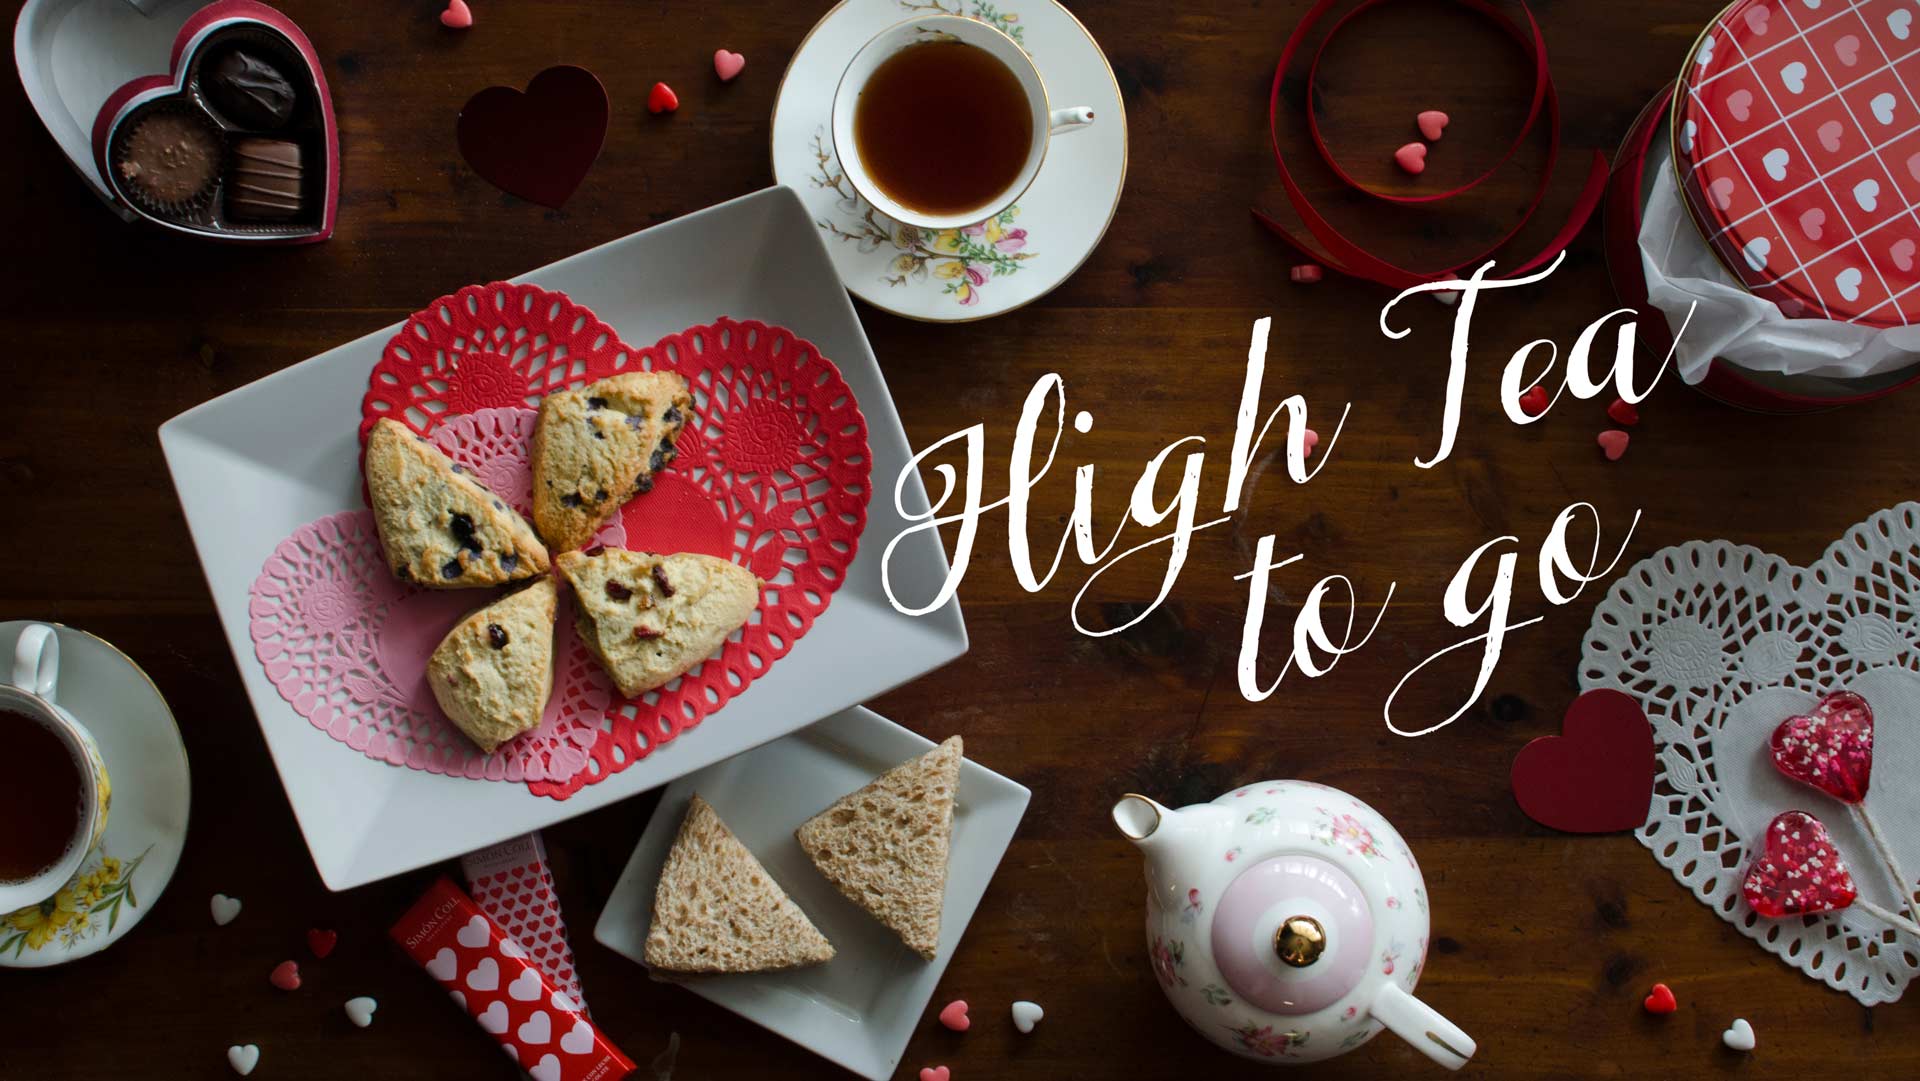 A photograph of a valentine's-themed high tea setting